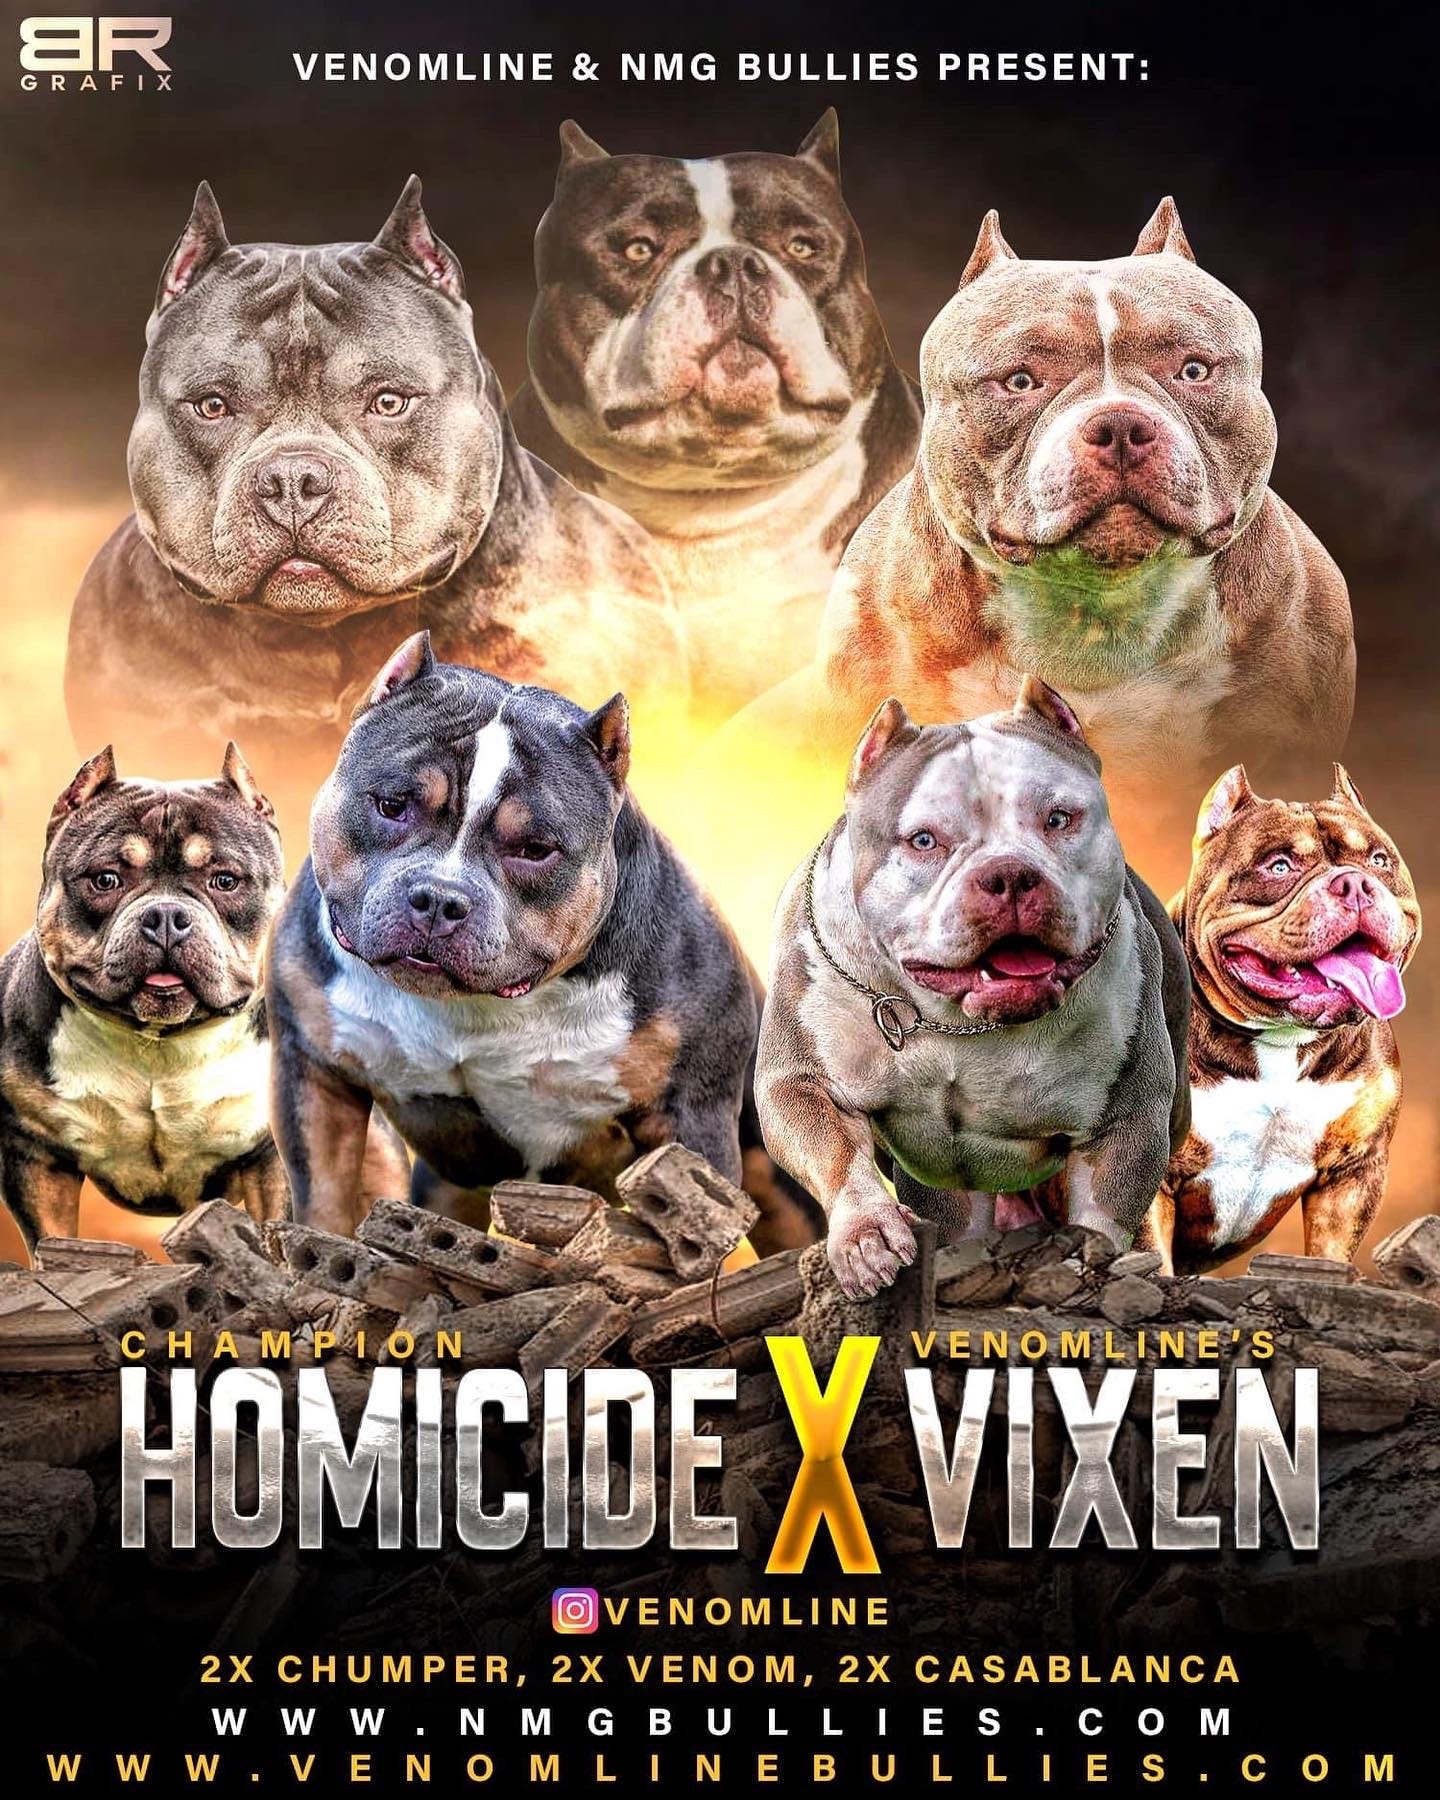 THE VENOMLINE POCKET BULLY BLOODLINE: AMERICAN BULLY PUPPIES FOR